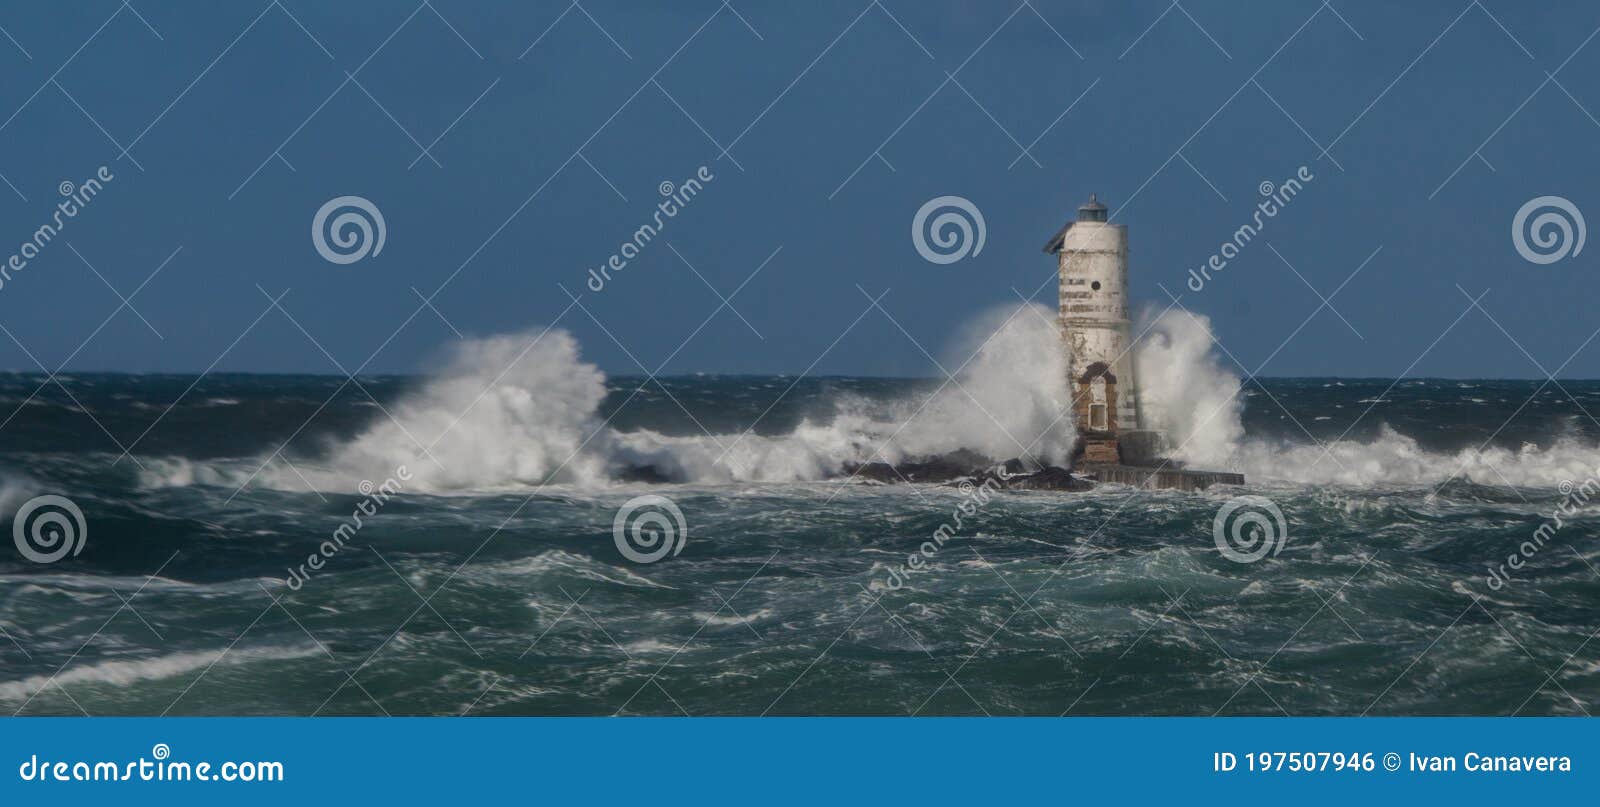 the lighthouse of the mangiabarche shrouded by the waves of a mistral wind storm